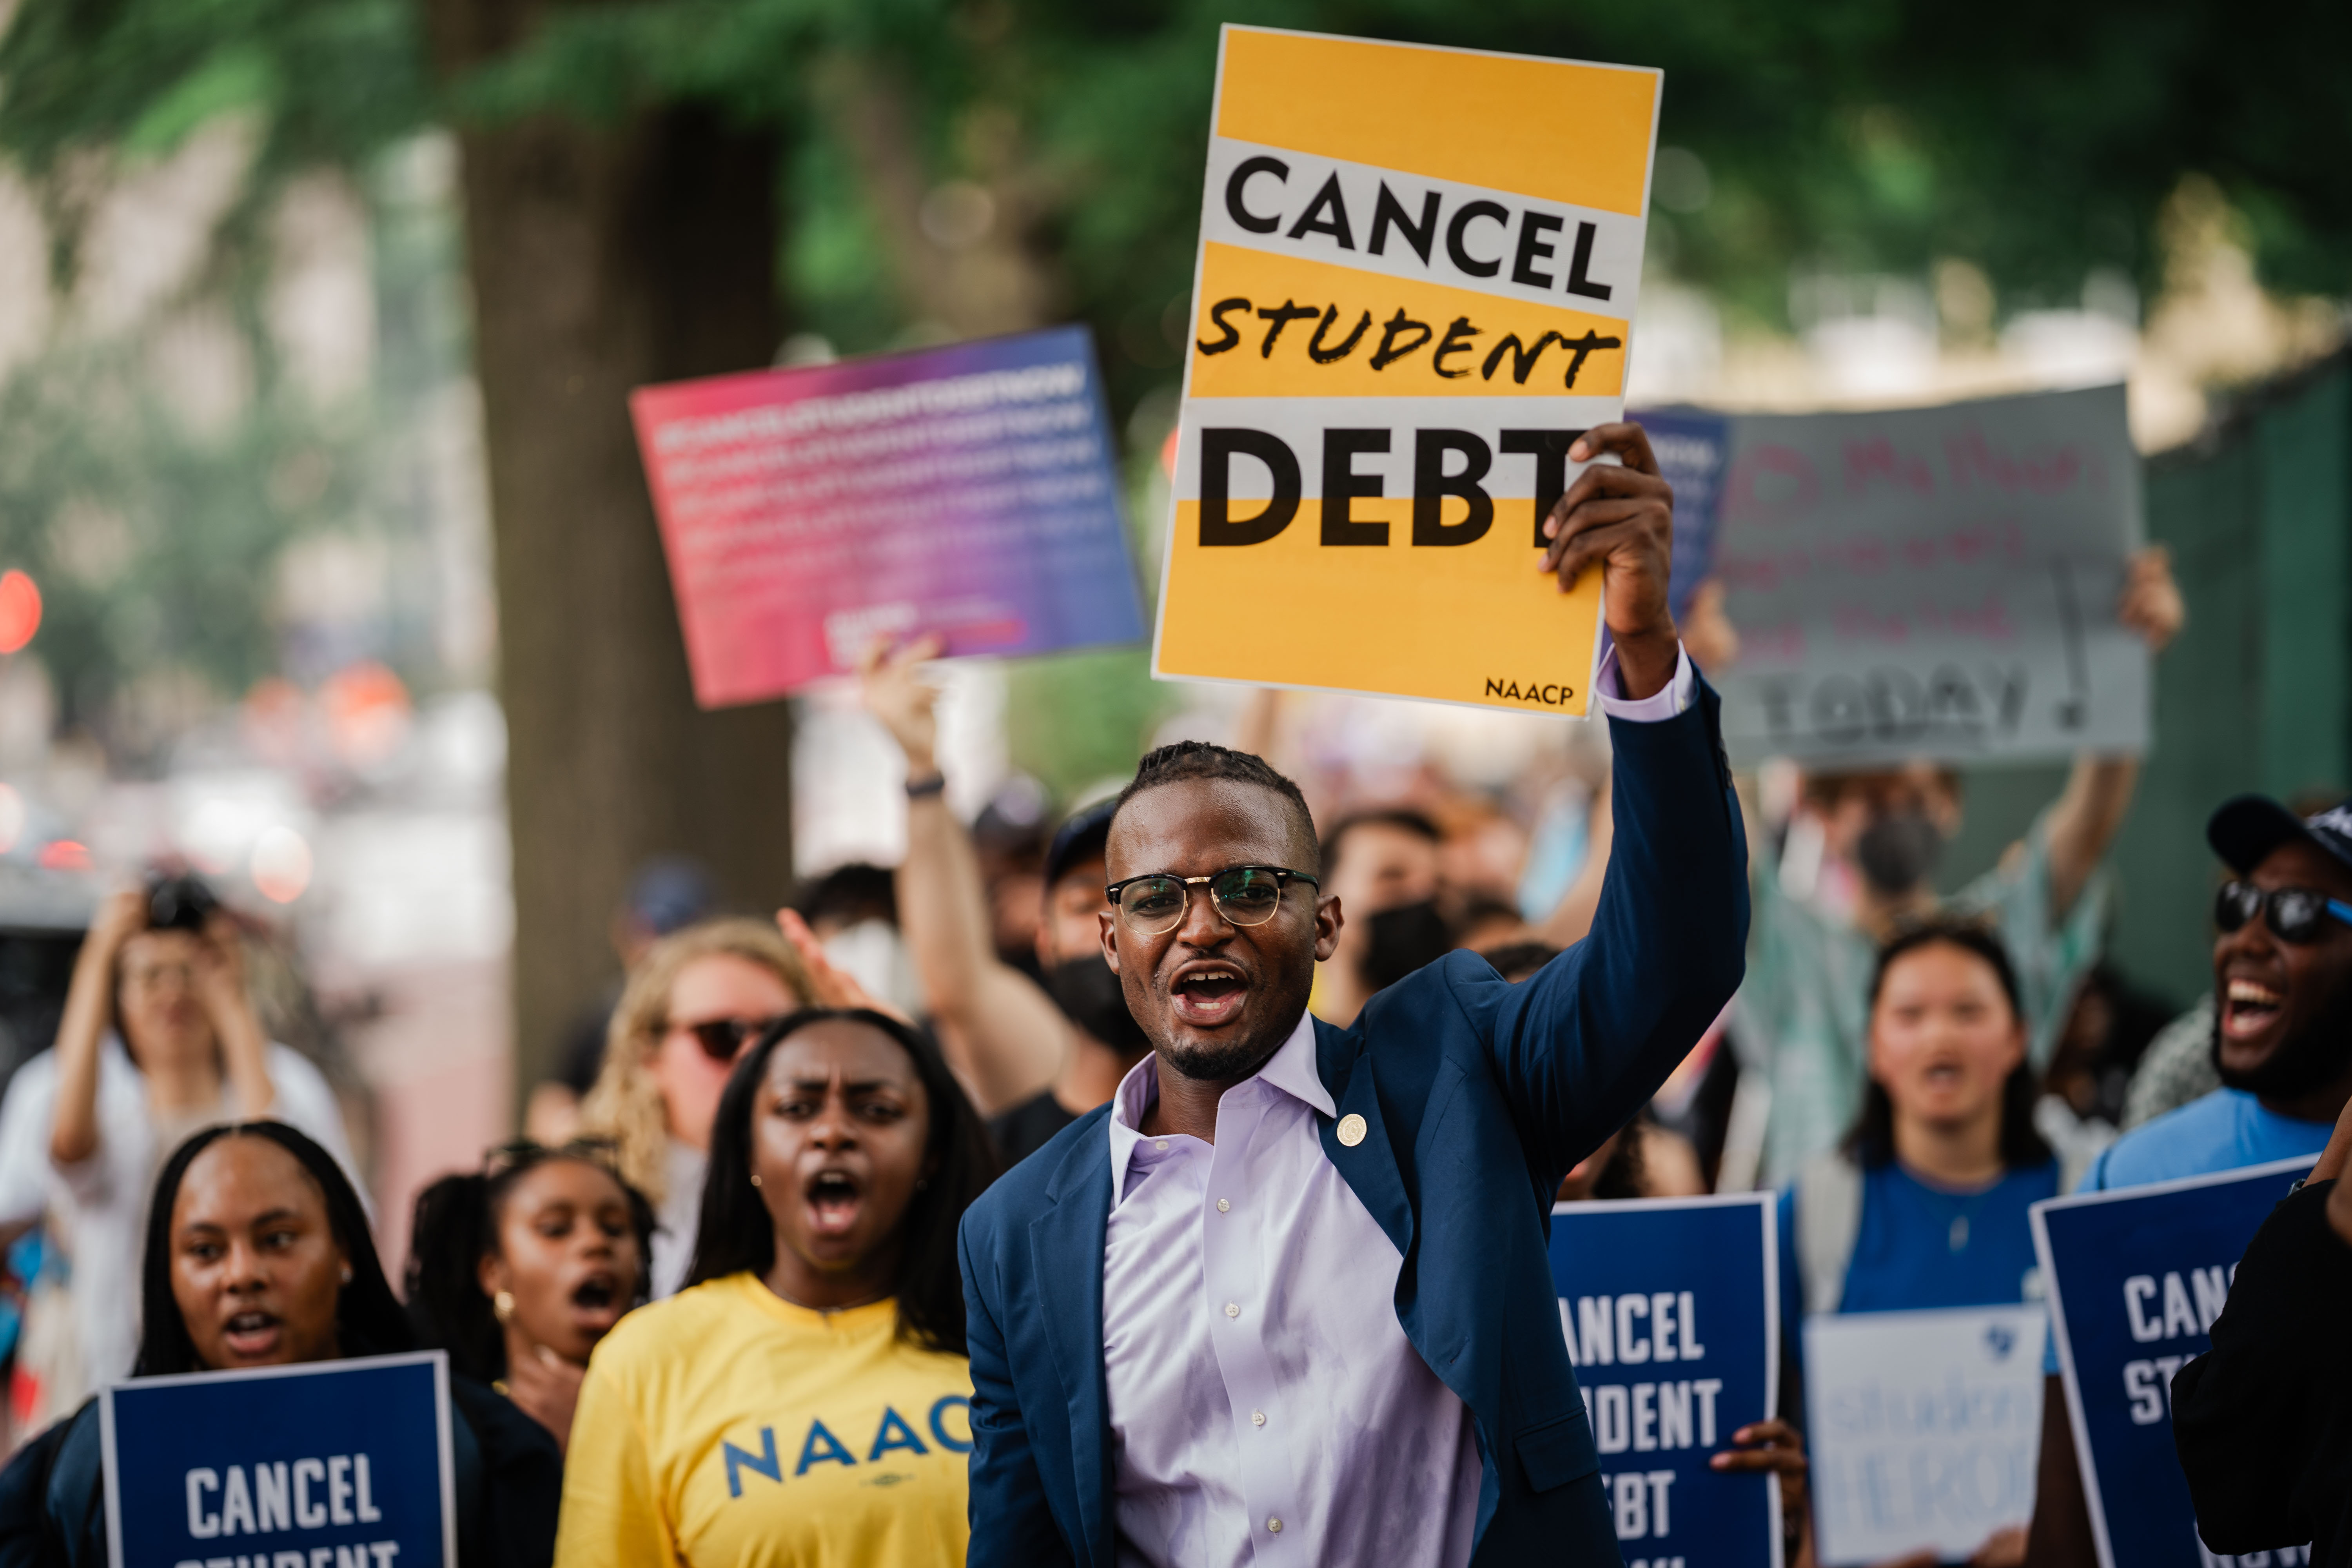 Cole holds a sign that says “Cancel Student Debt” while others march behind him. 